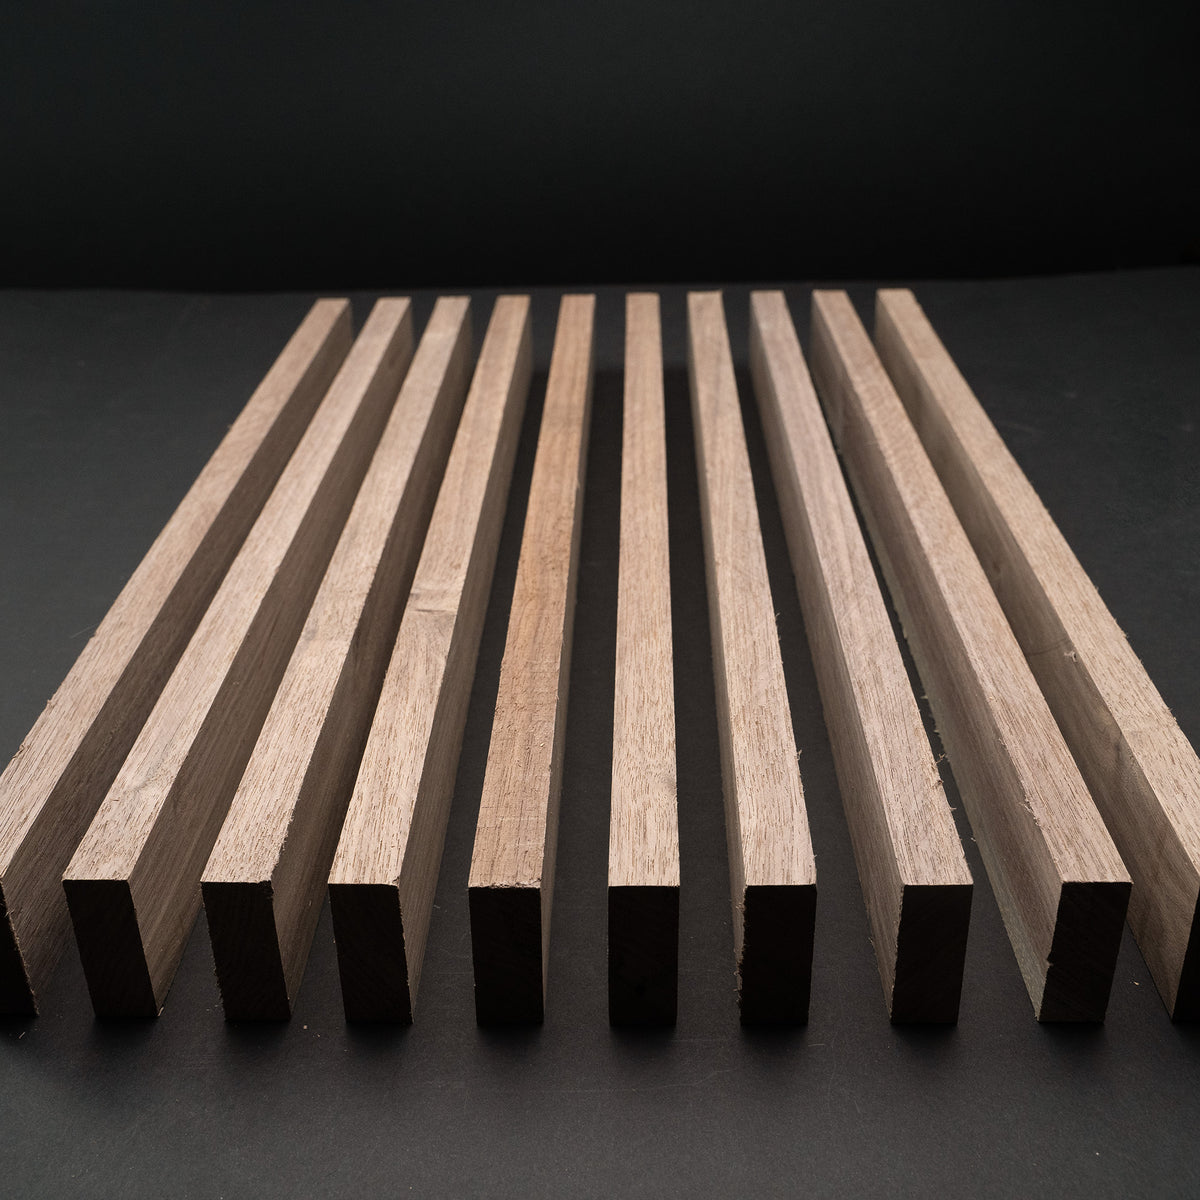 3/4&quot; x 2&quot; x 24&quot; Black Walnut Boards - Pack of 5, 10, 15 or 20 - DIY Cutting Charcuterie Cheese Boards Tray - Kiln Dried